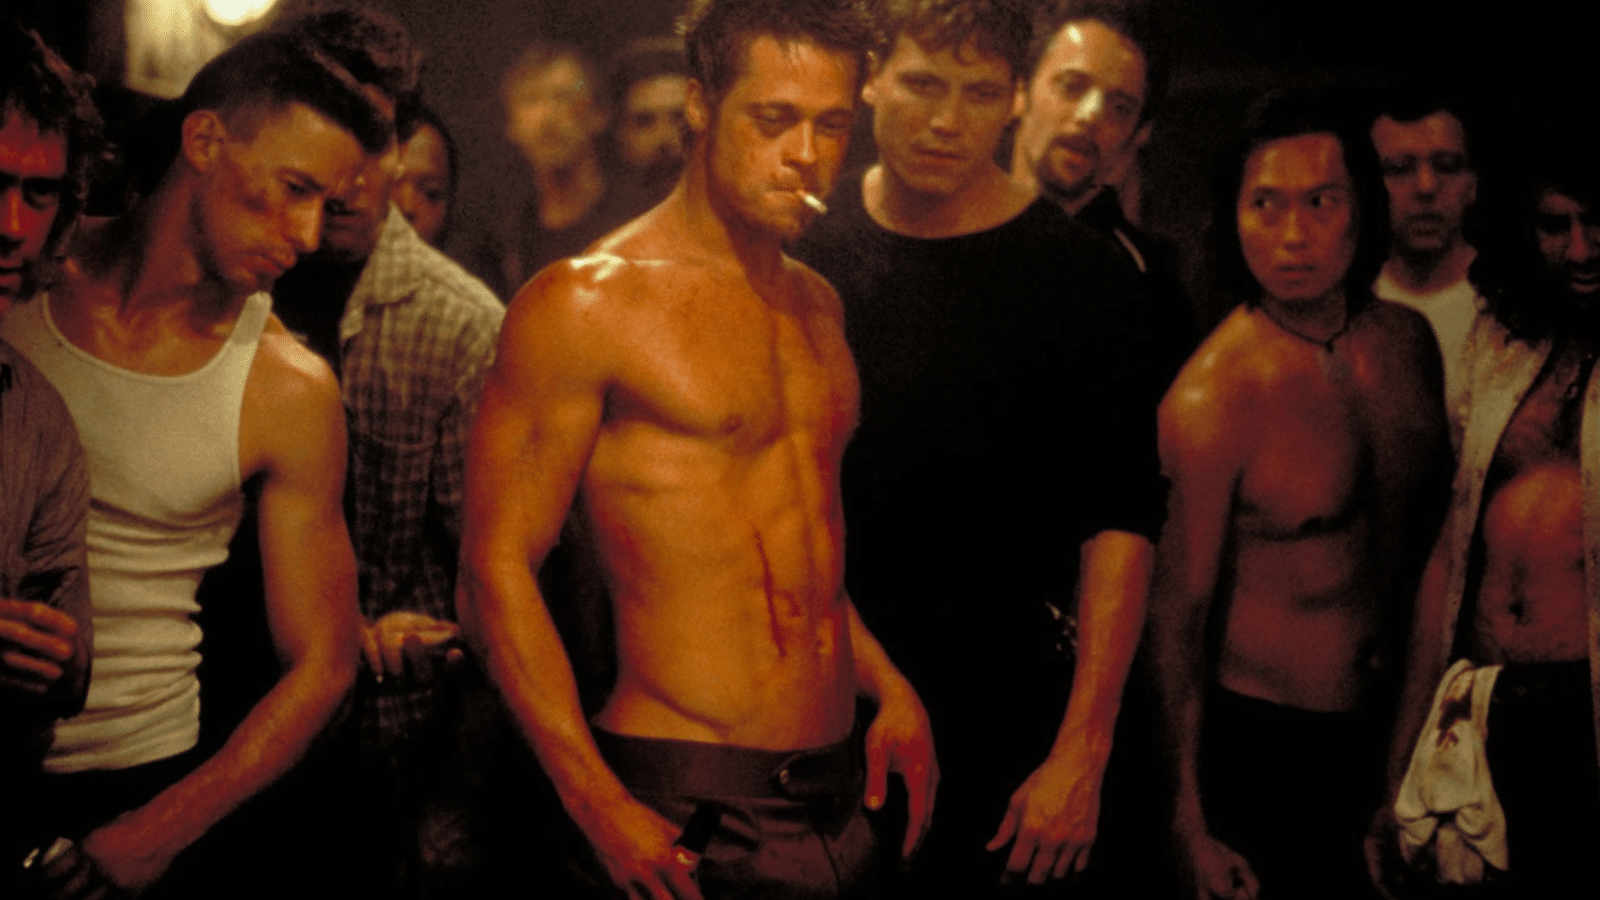 <p>Based on the Chuck Palahniuk novel, <em>Fight Club</em> is directed by David Fincher and stars Edward Norton and Brad Pitt.</p> <p>It features the narrator's (Norton) journey as his discontent with his everyday white-collar job and lifestyle grows.</p>